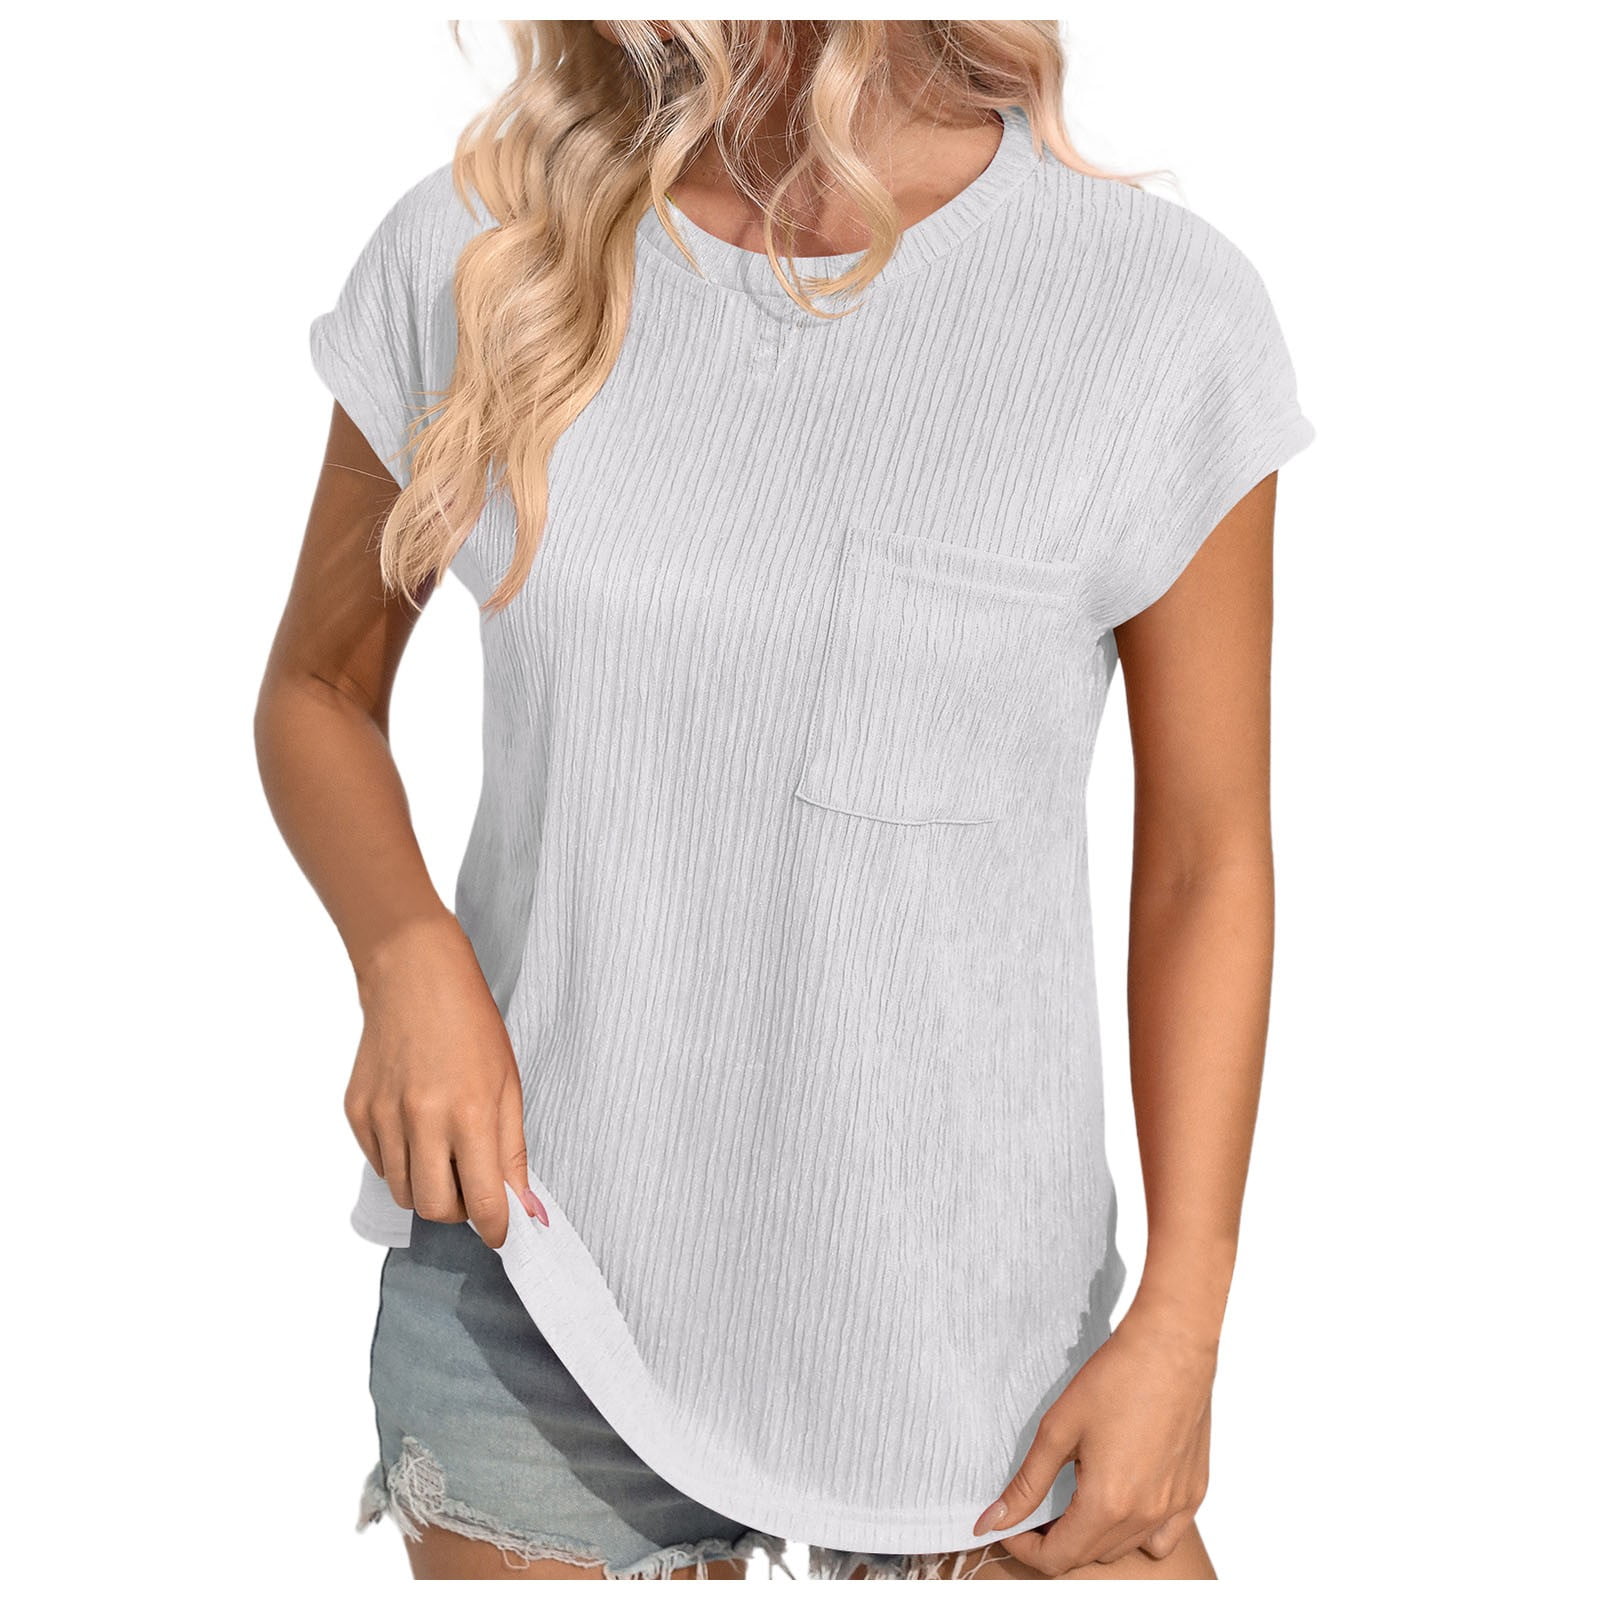 Cap Sleeve Shirt Top For Womens Trendy Crew Neck Blouse Basic Textured ...